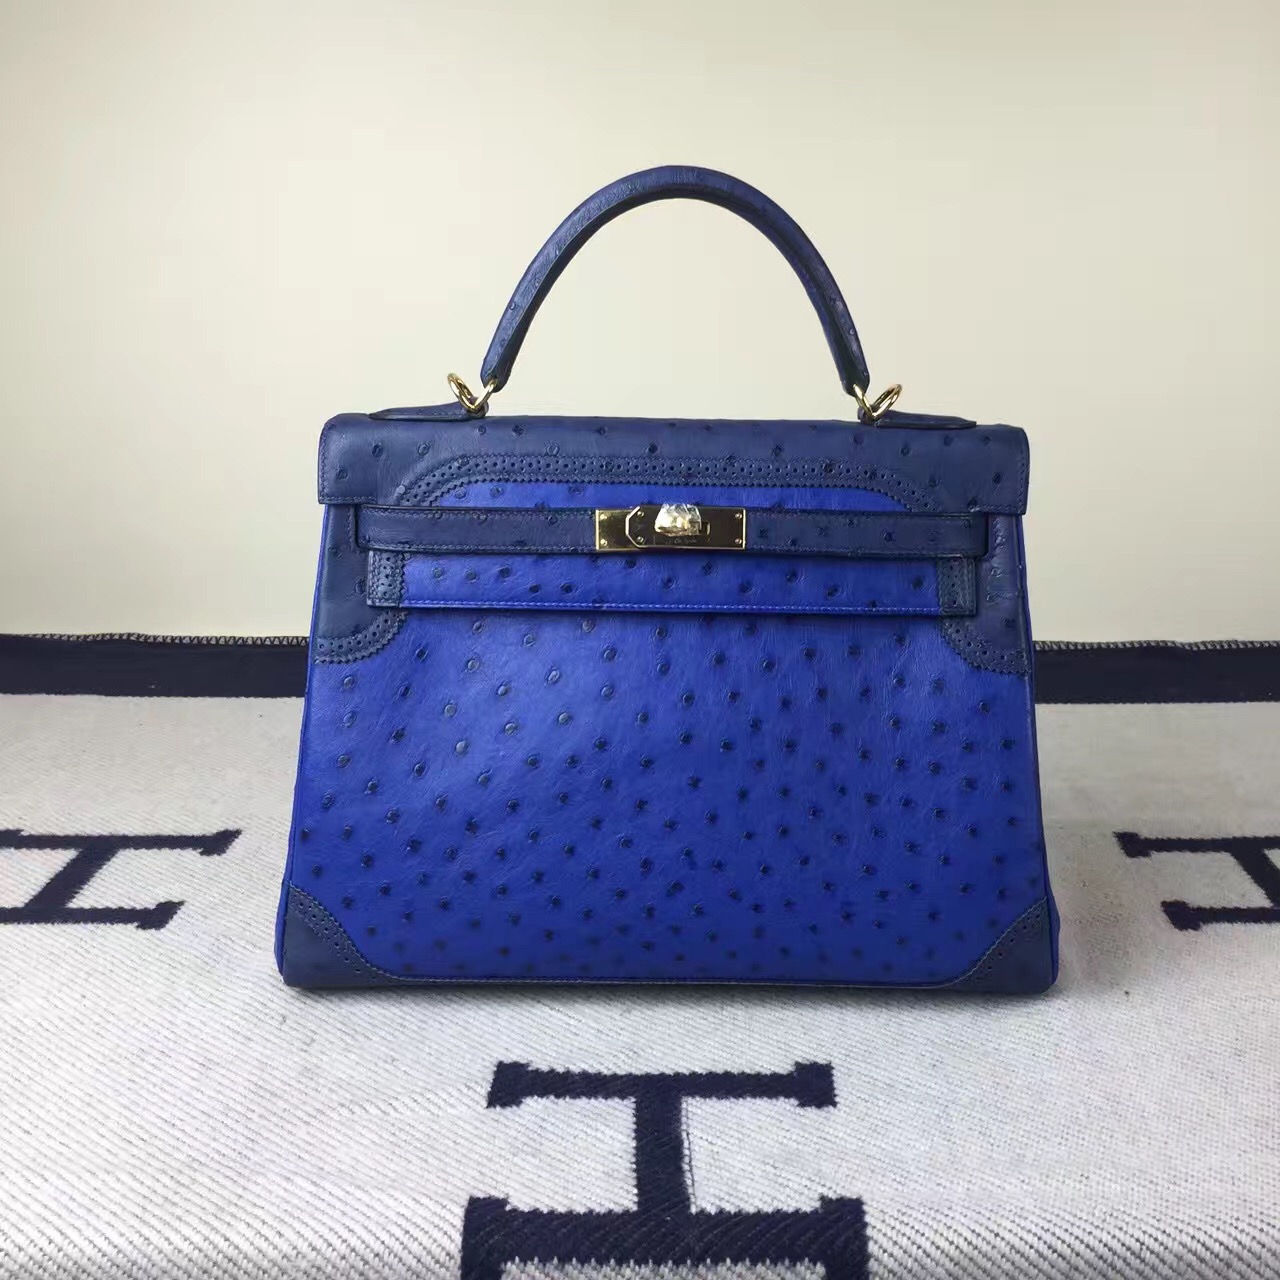 New Fashion Hermes Ghillies Kelly32CM Bag in 7T Blue Electric Ostrich Leather